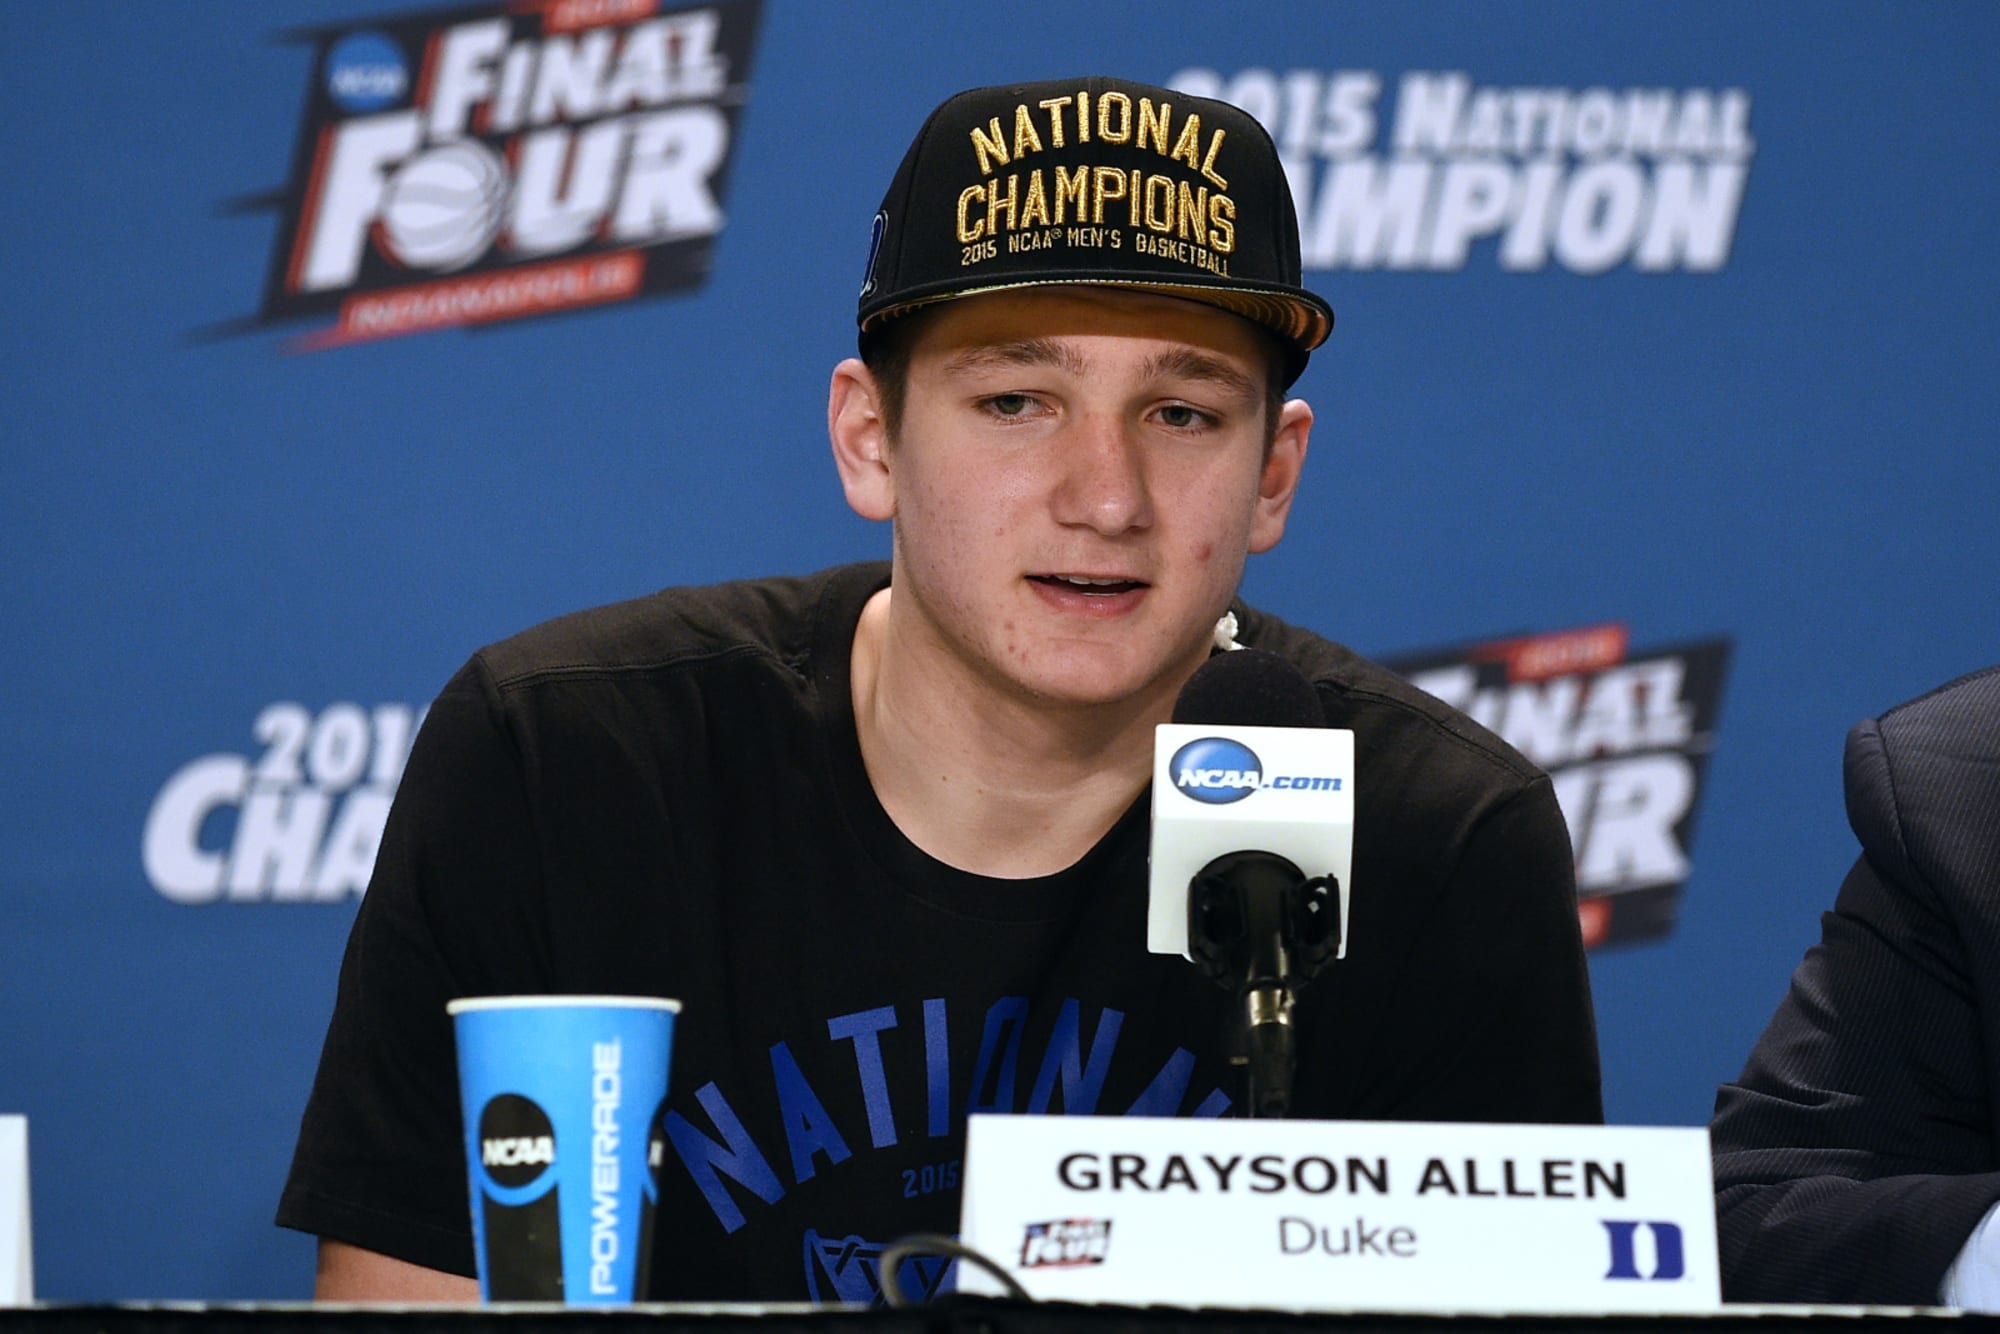 Grayson Allen leads Duke to NCAA title. Played in City of Palms.